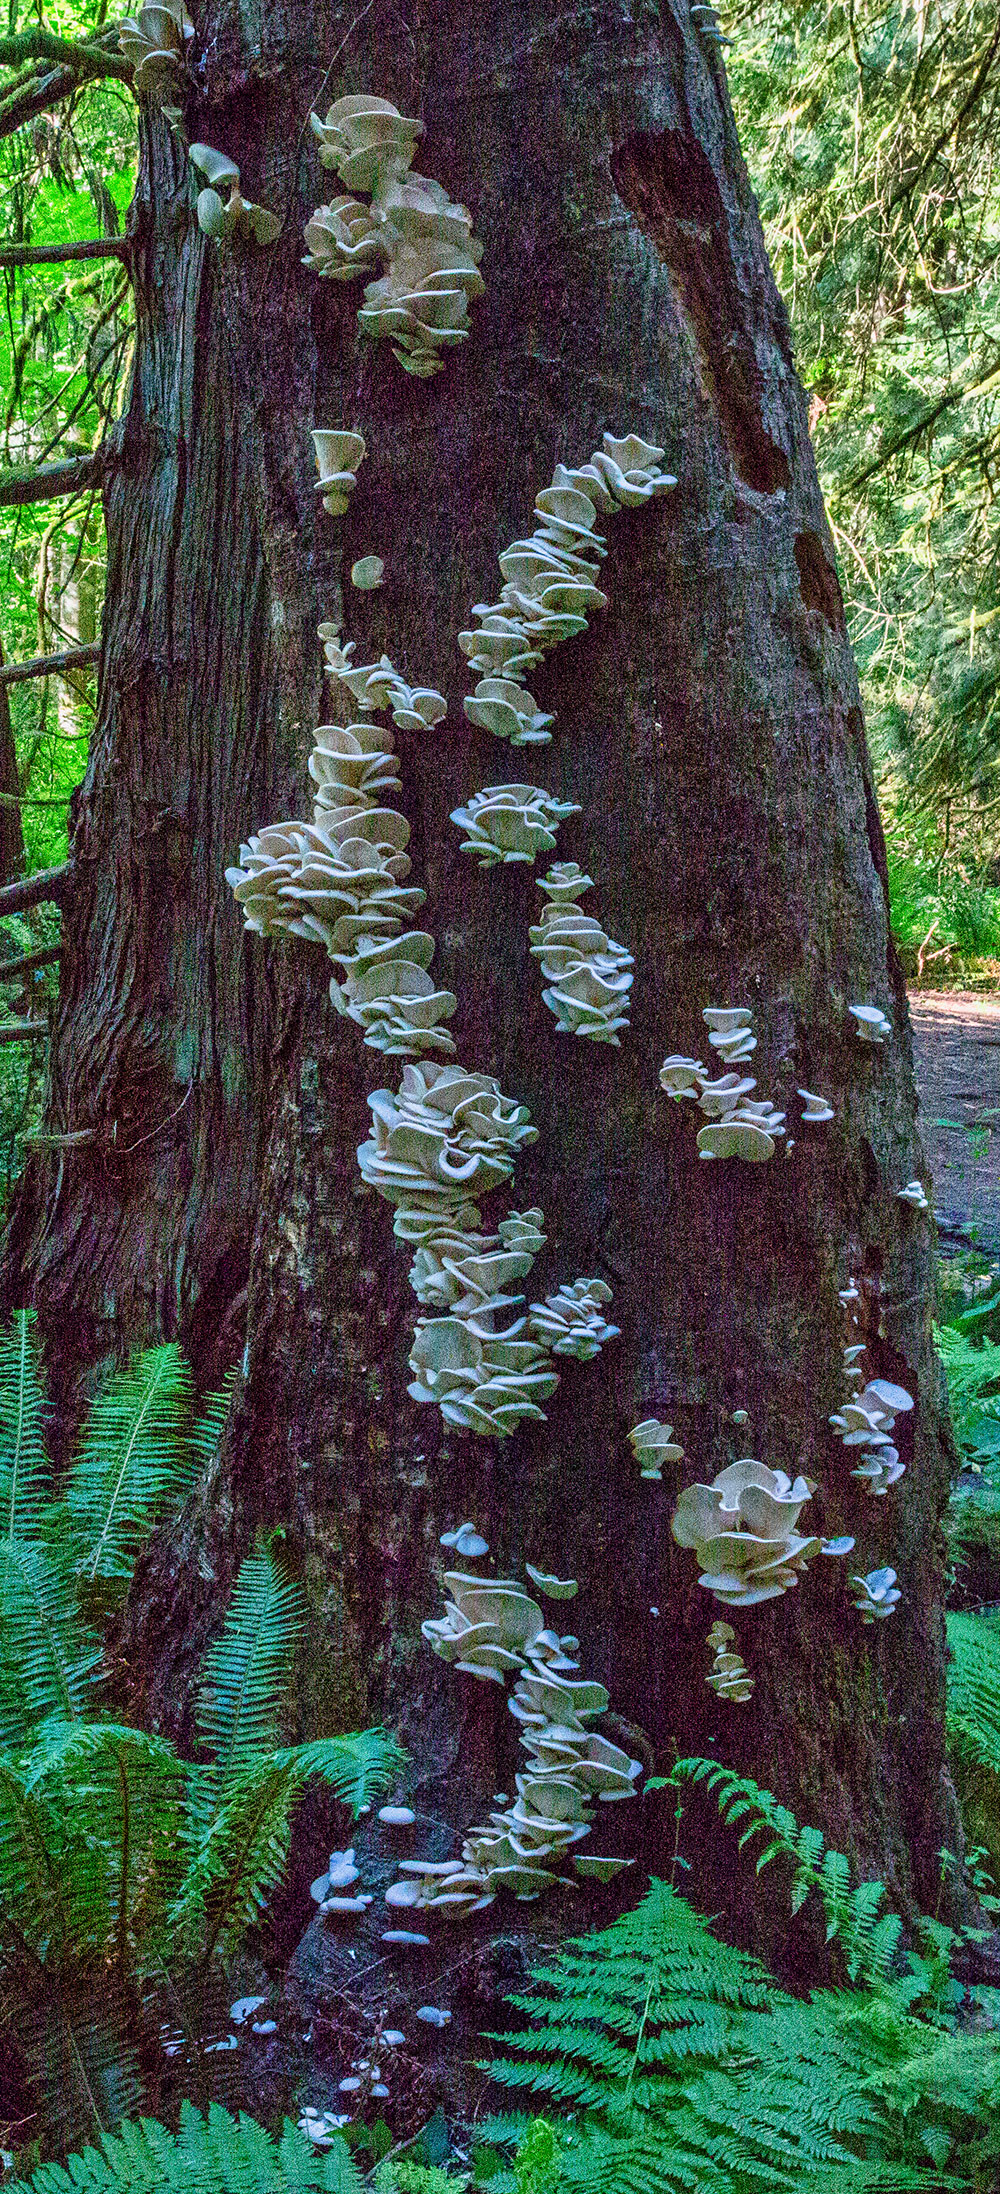 A tree trunk in a forest features white fungal growths across its trunk.